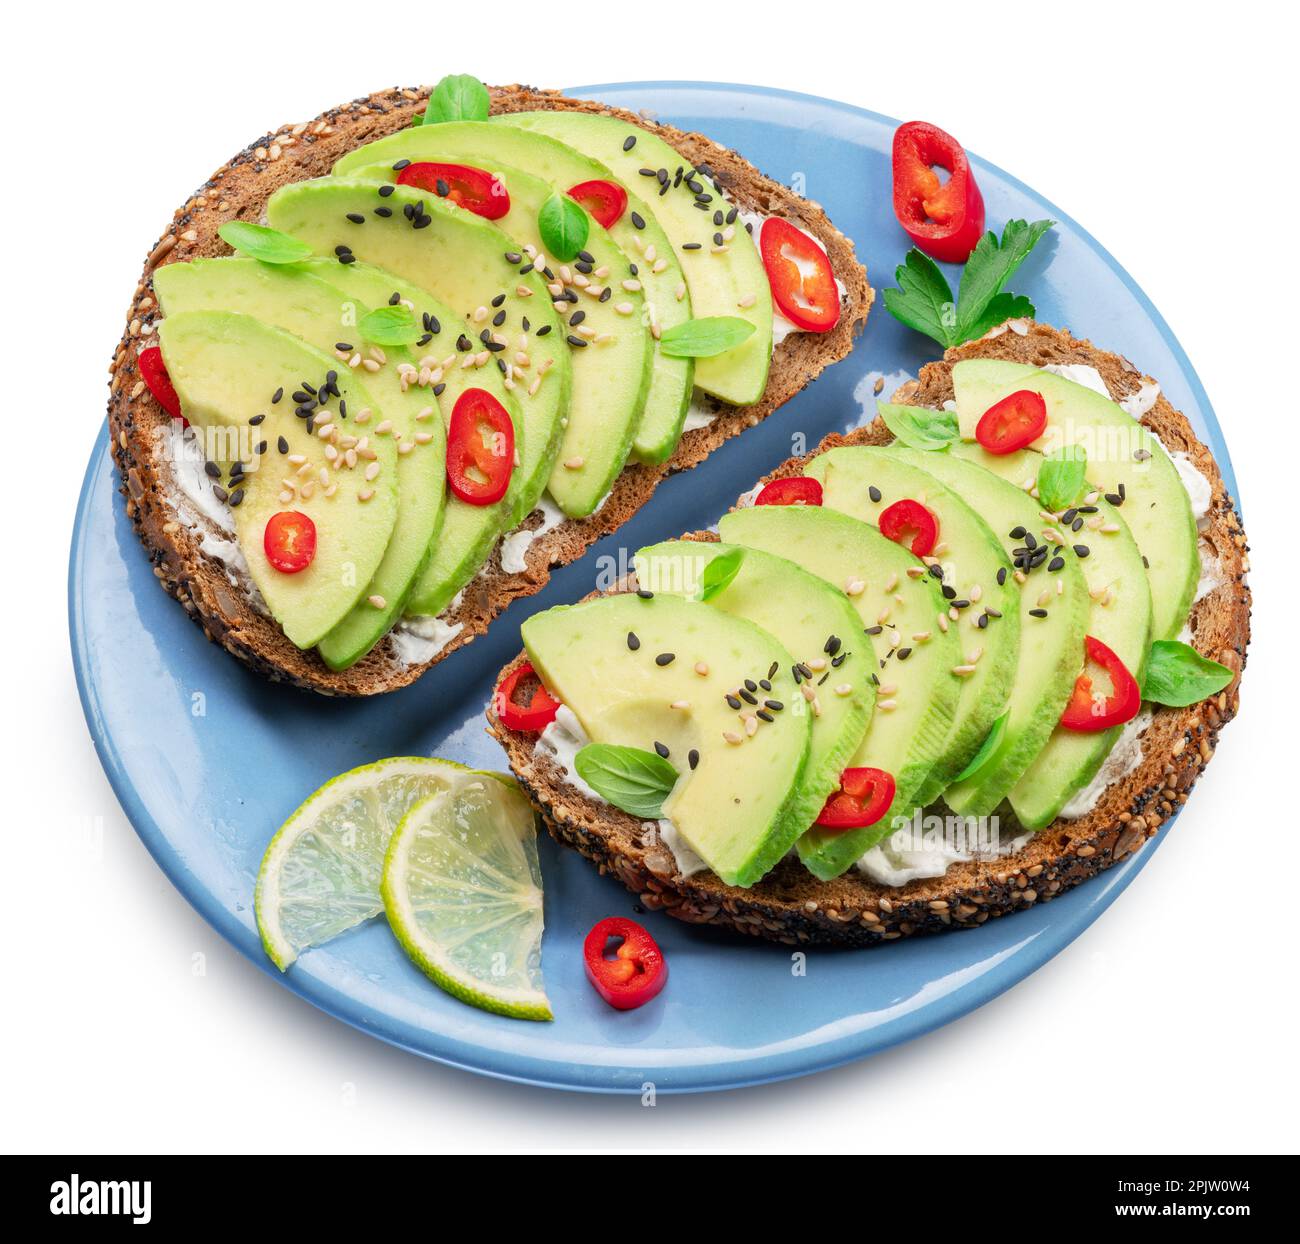 Avocado Toasts Bread With Avocado Slices Pieces Of Chilli Pepper And Black Sesame Isolated On